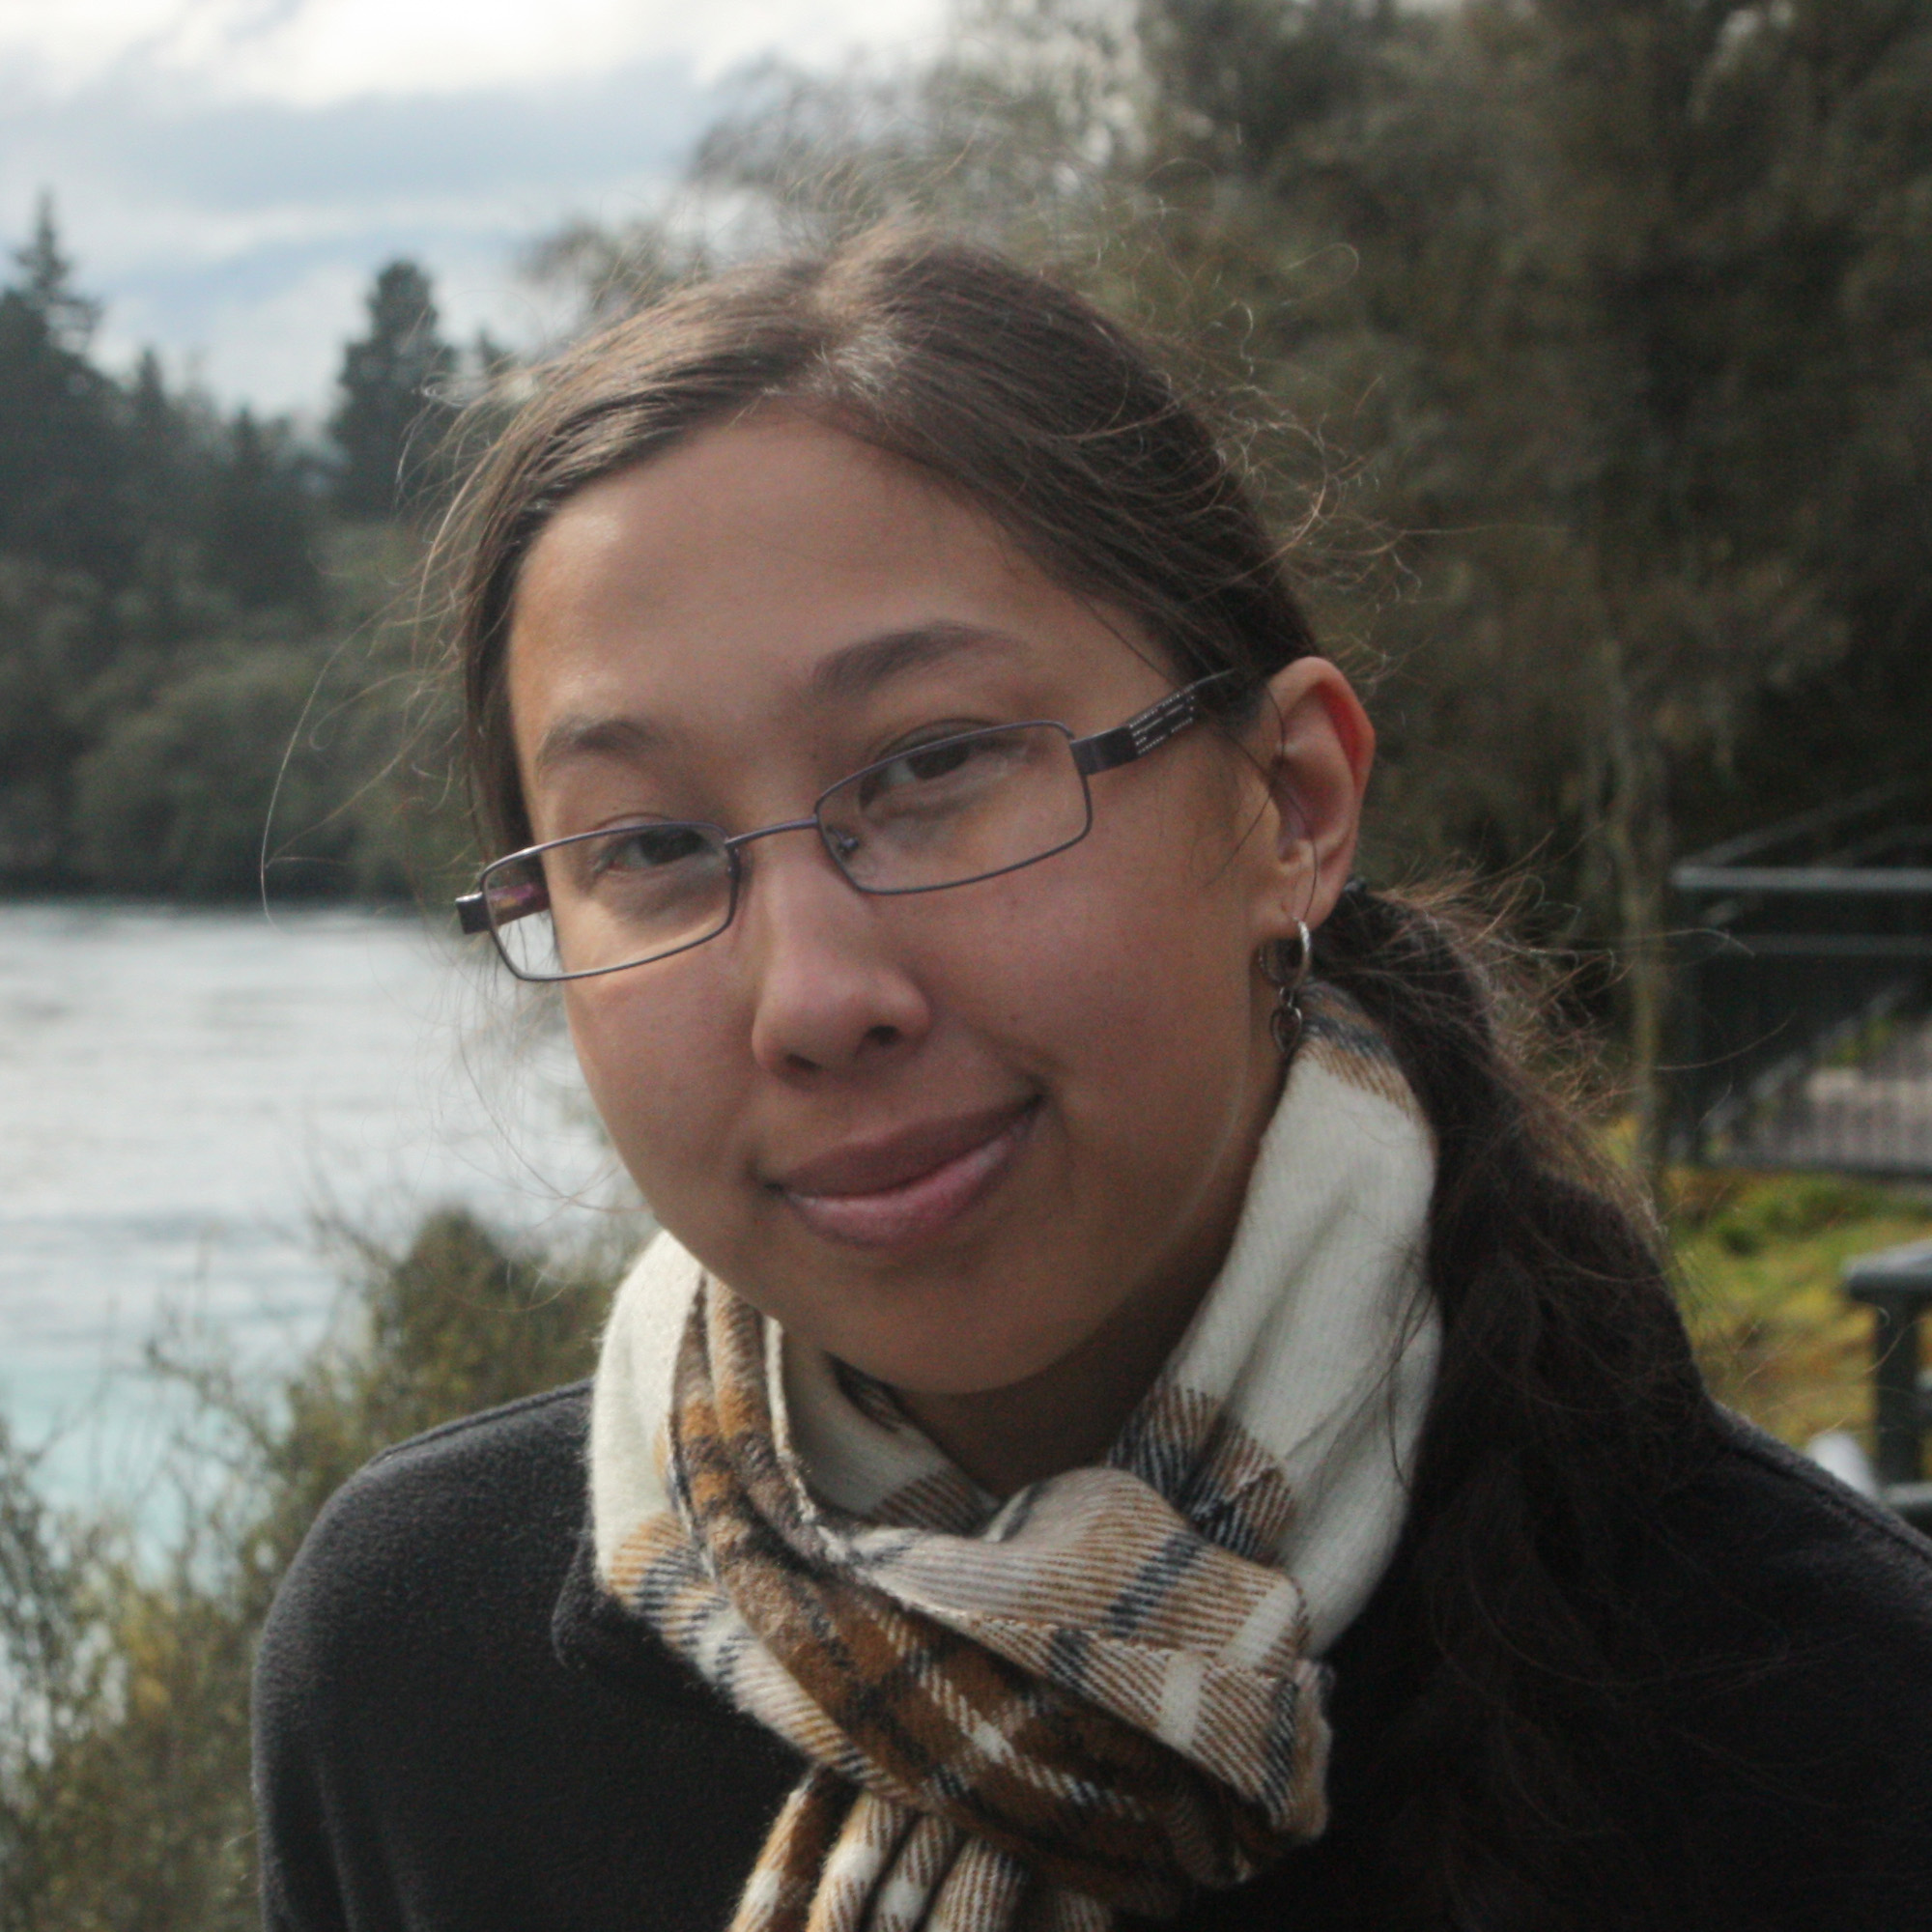 Photo of Erin, a young Asian woman with glasses, smiling by a lake 